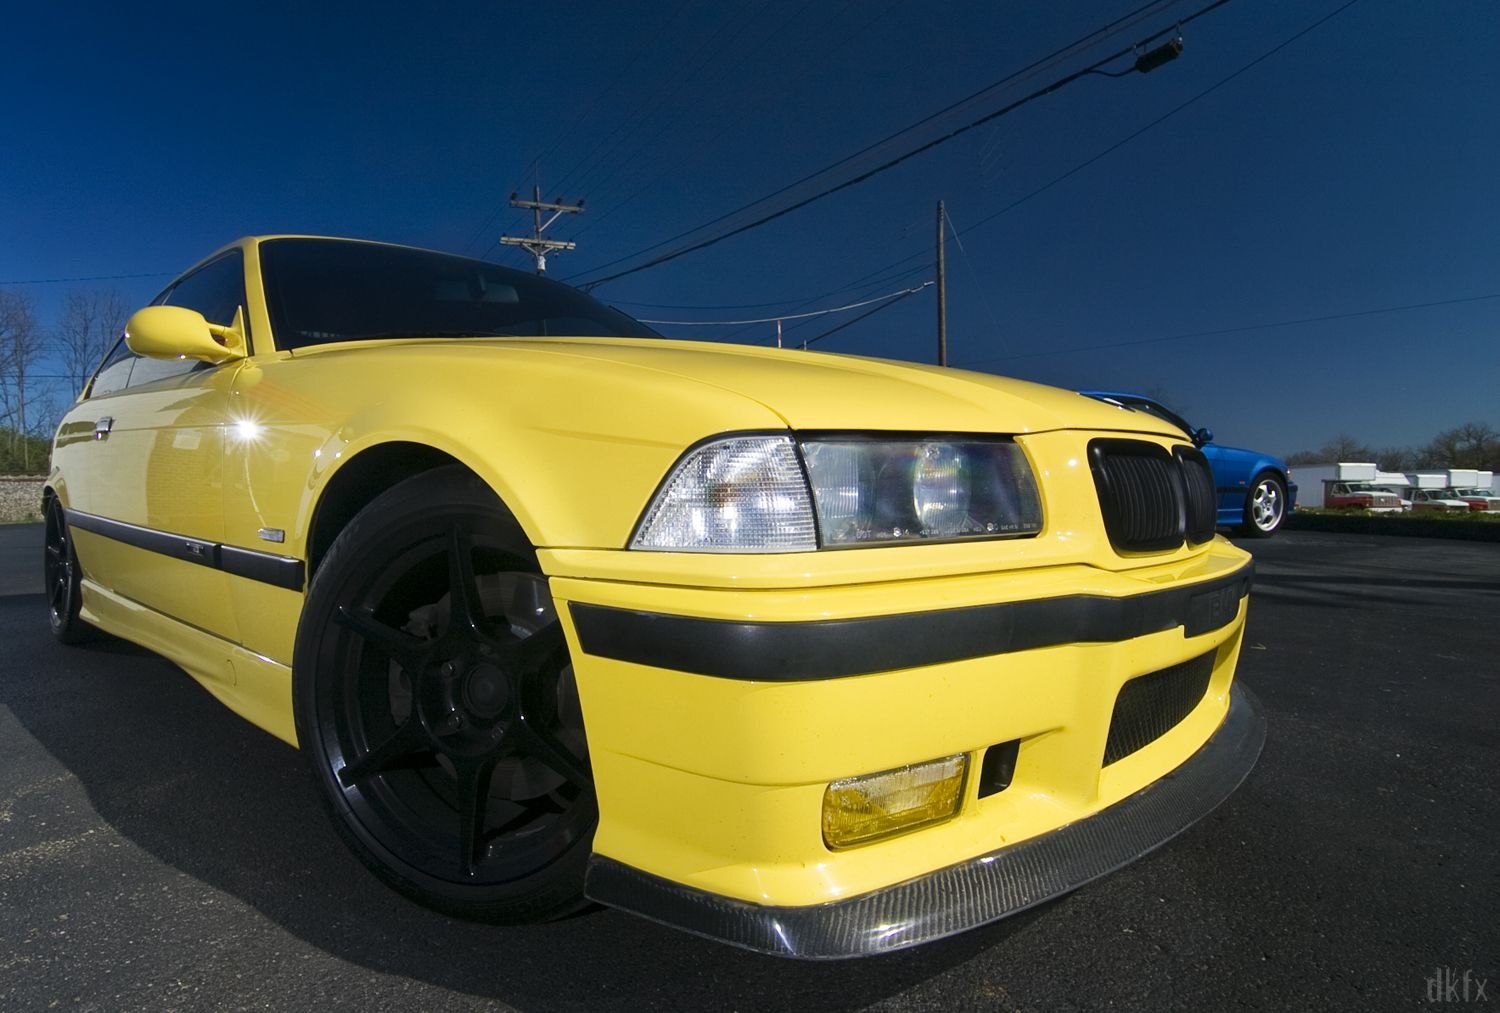 Carbon Fiber Front Lip on Yellow BMW 3-Series - Photo by dan kinzie